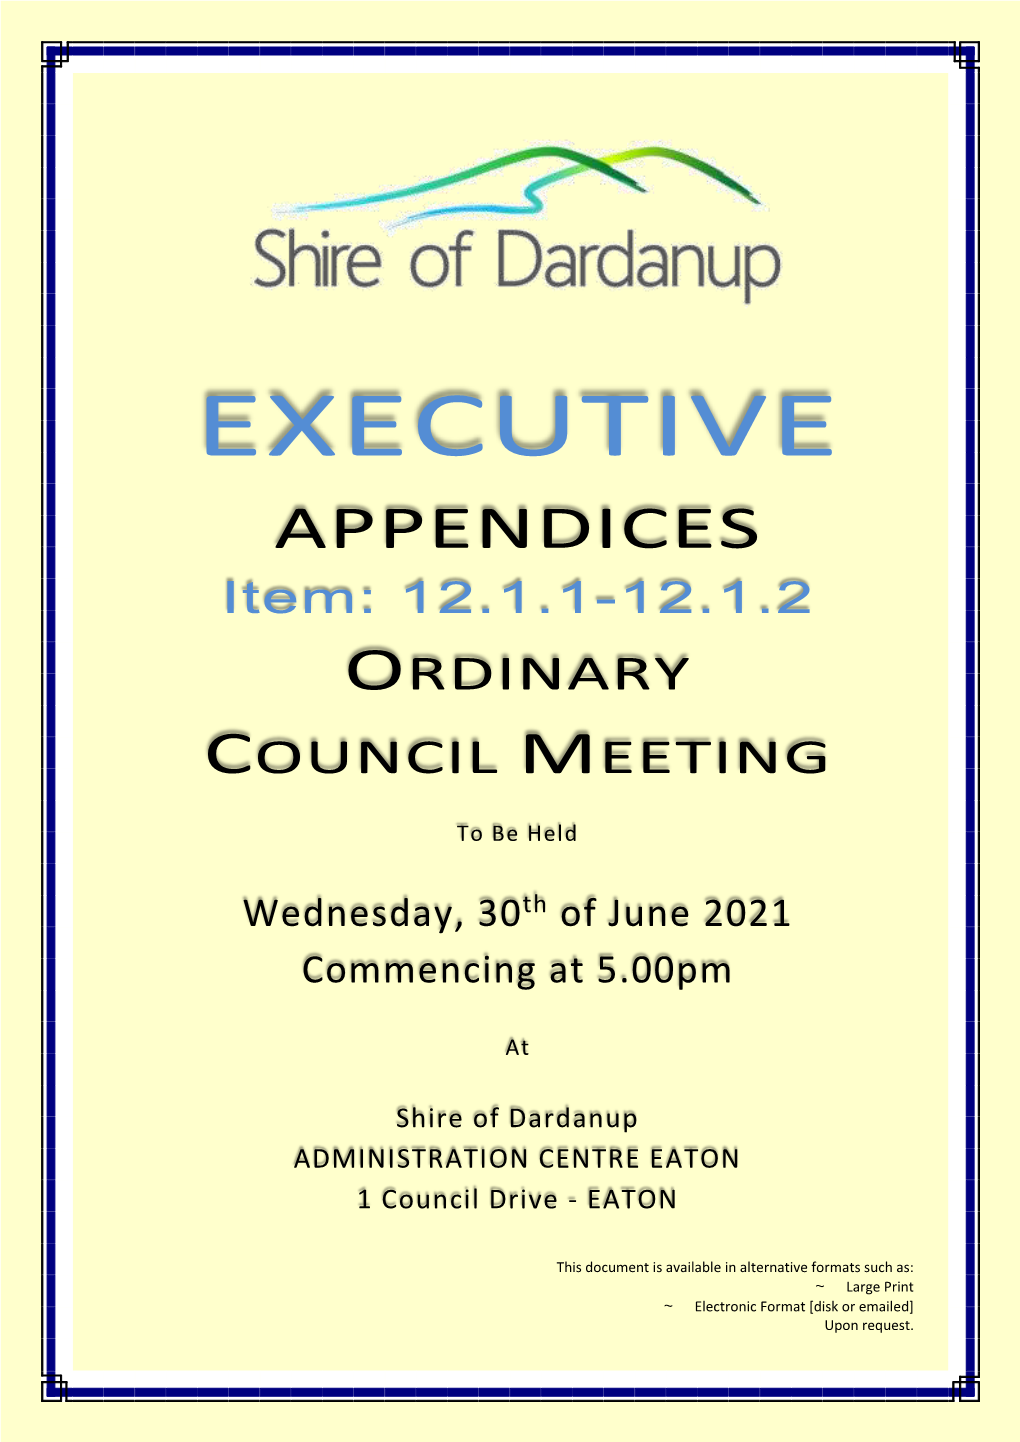 Wednesday, 30Th of June 2021 Commencing at 5.00Pm